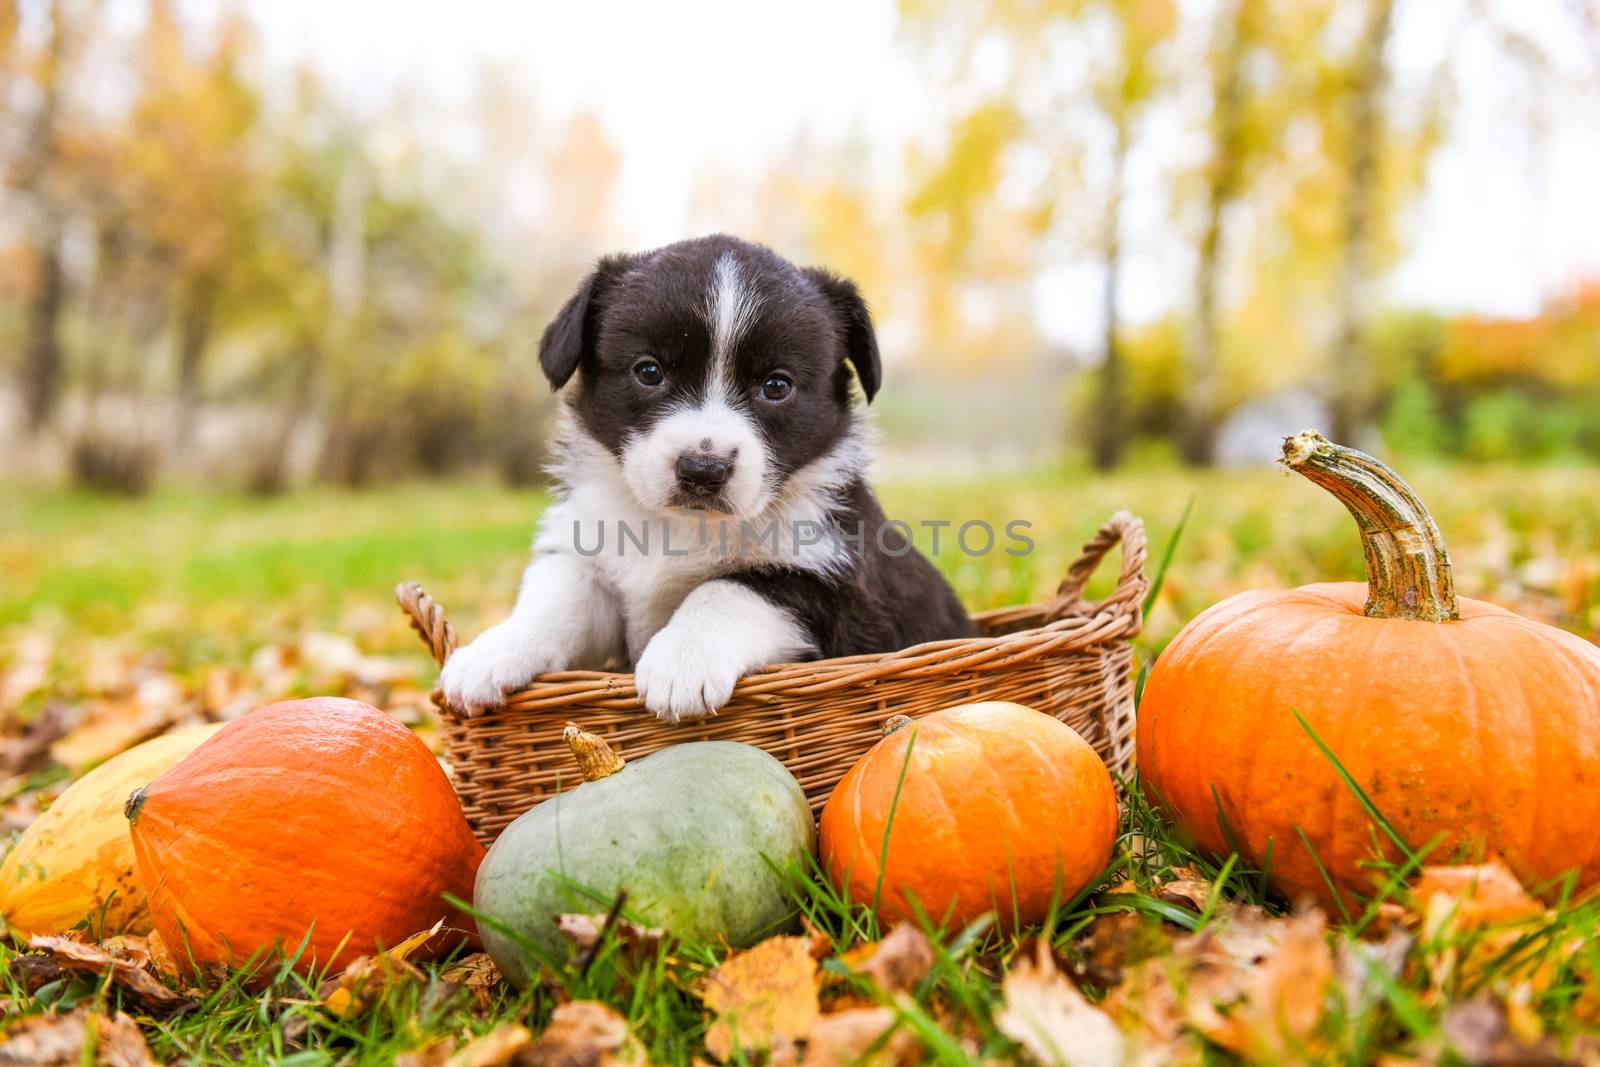 Corgi puppy dog with a pumpkin in the basket by infinityyy